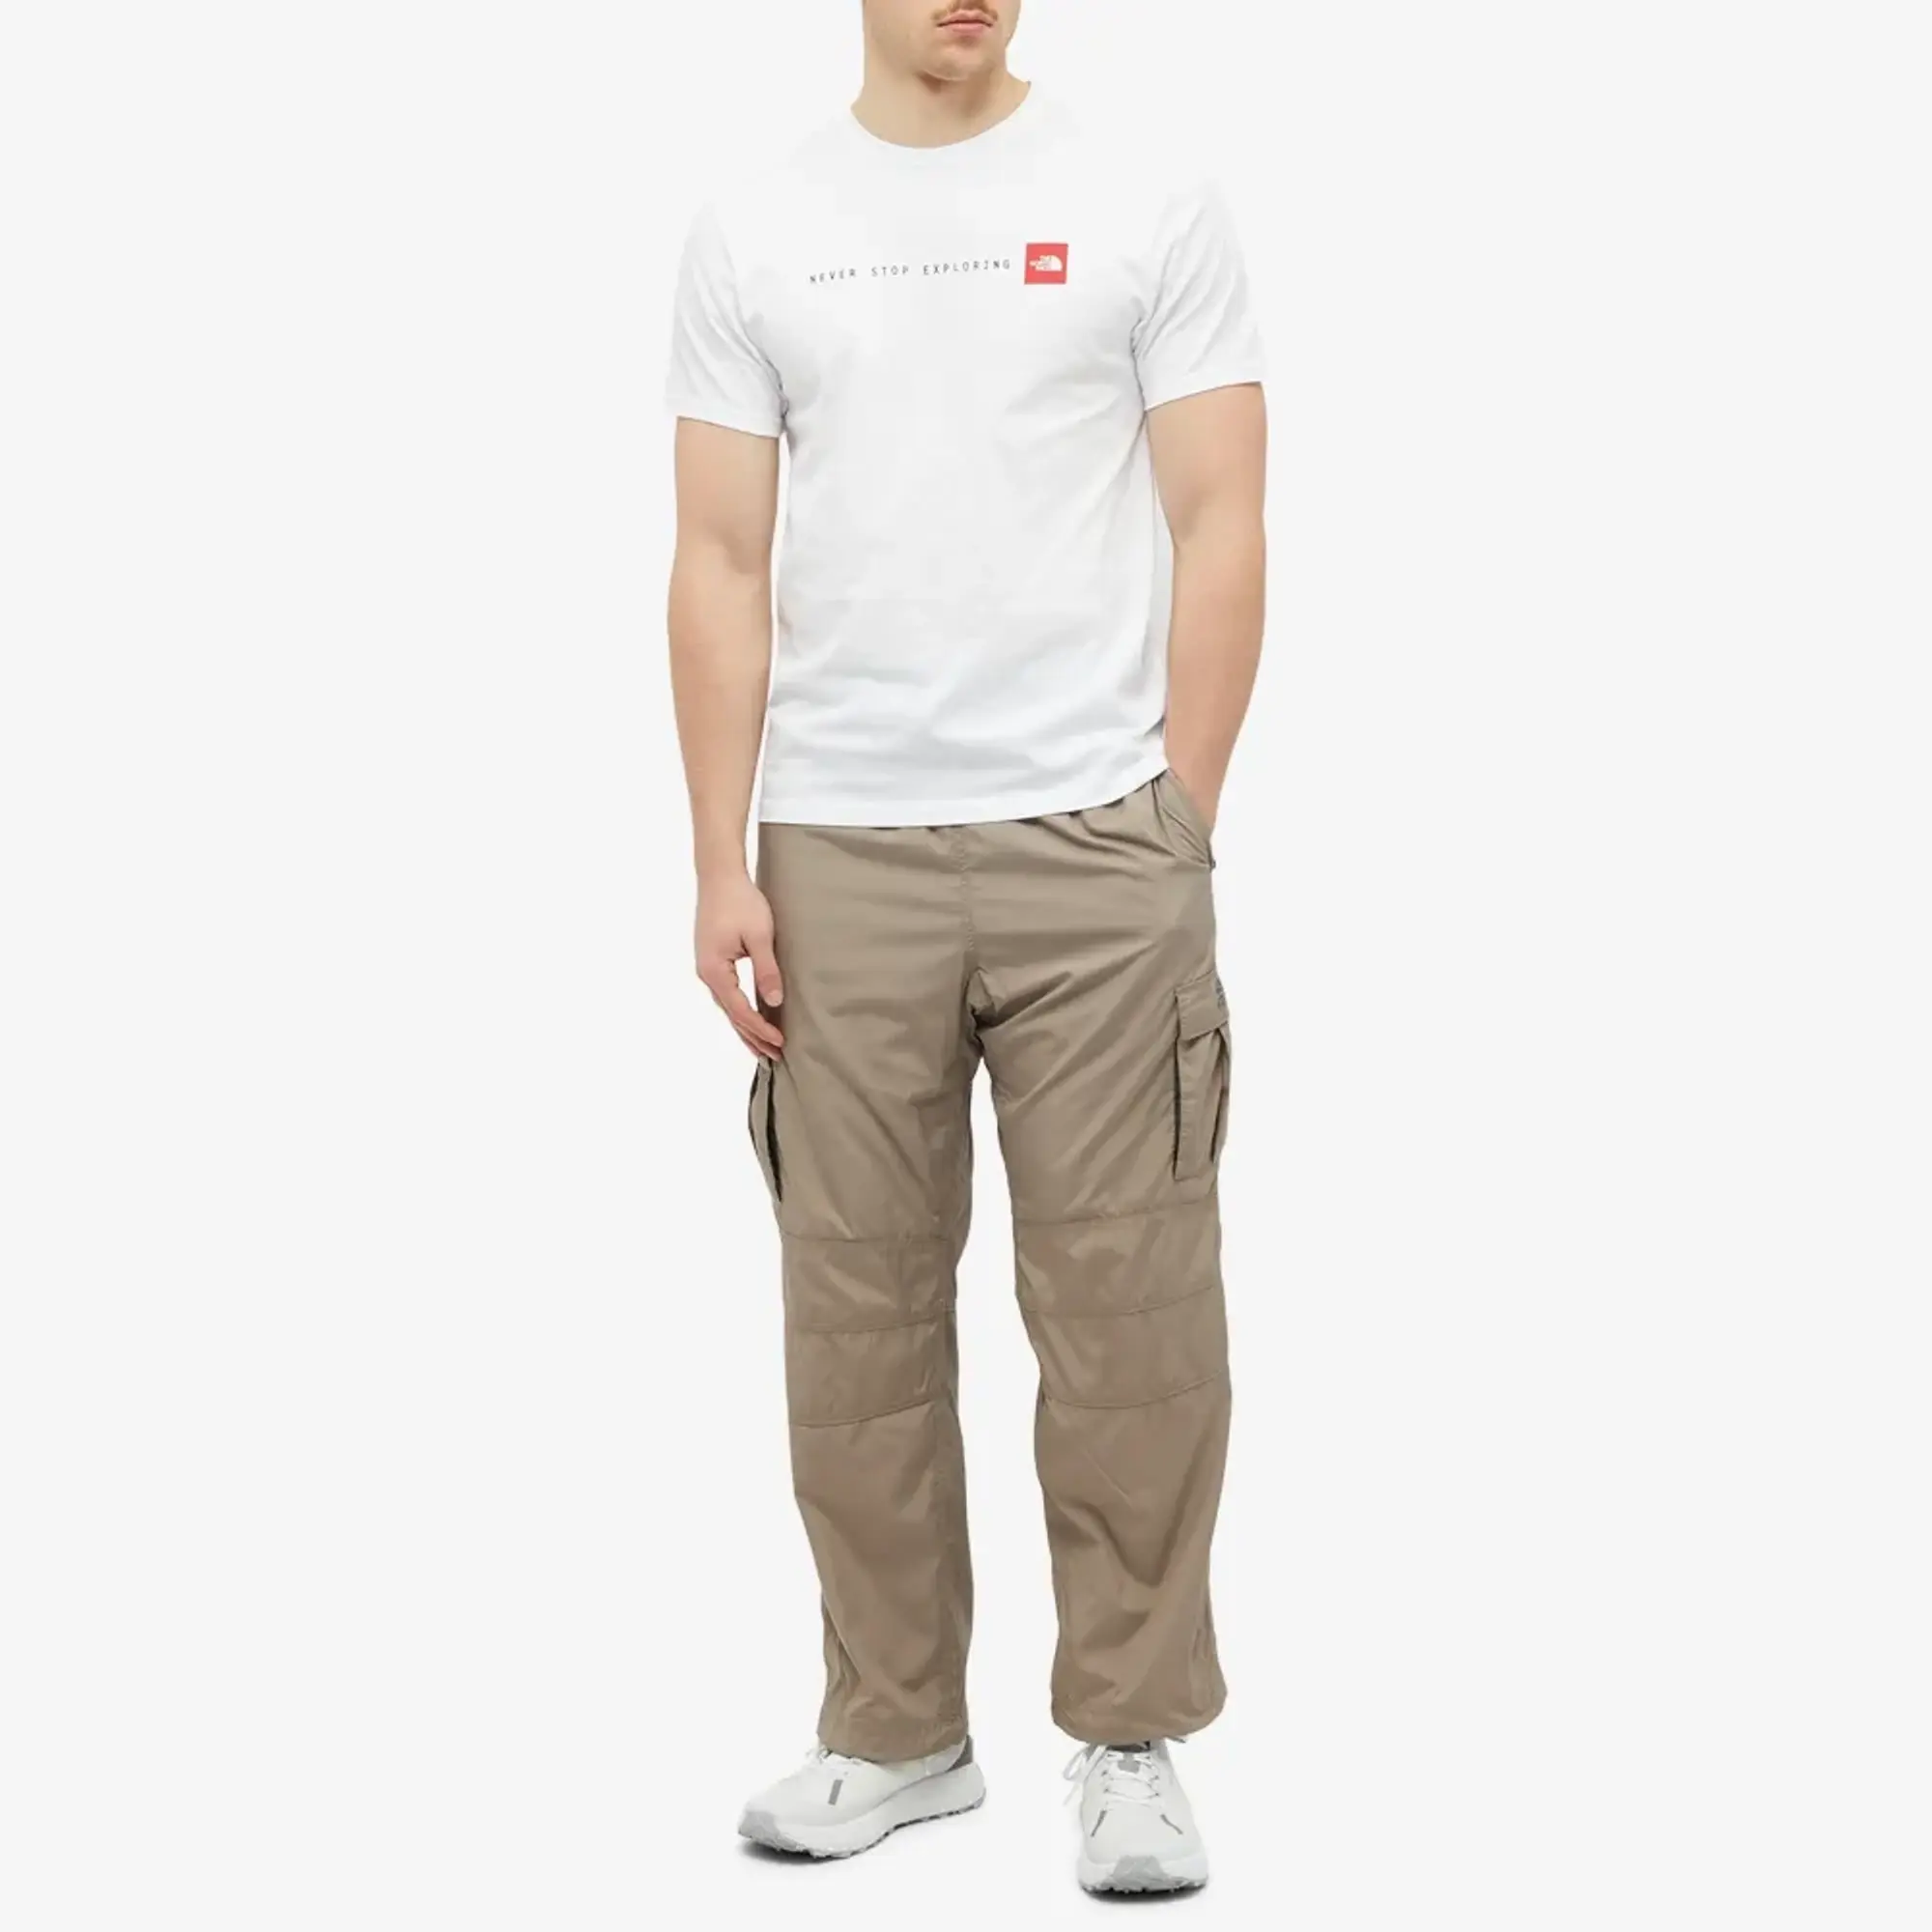 The North Face Never Stop Exploring T-Shirt In White